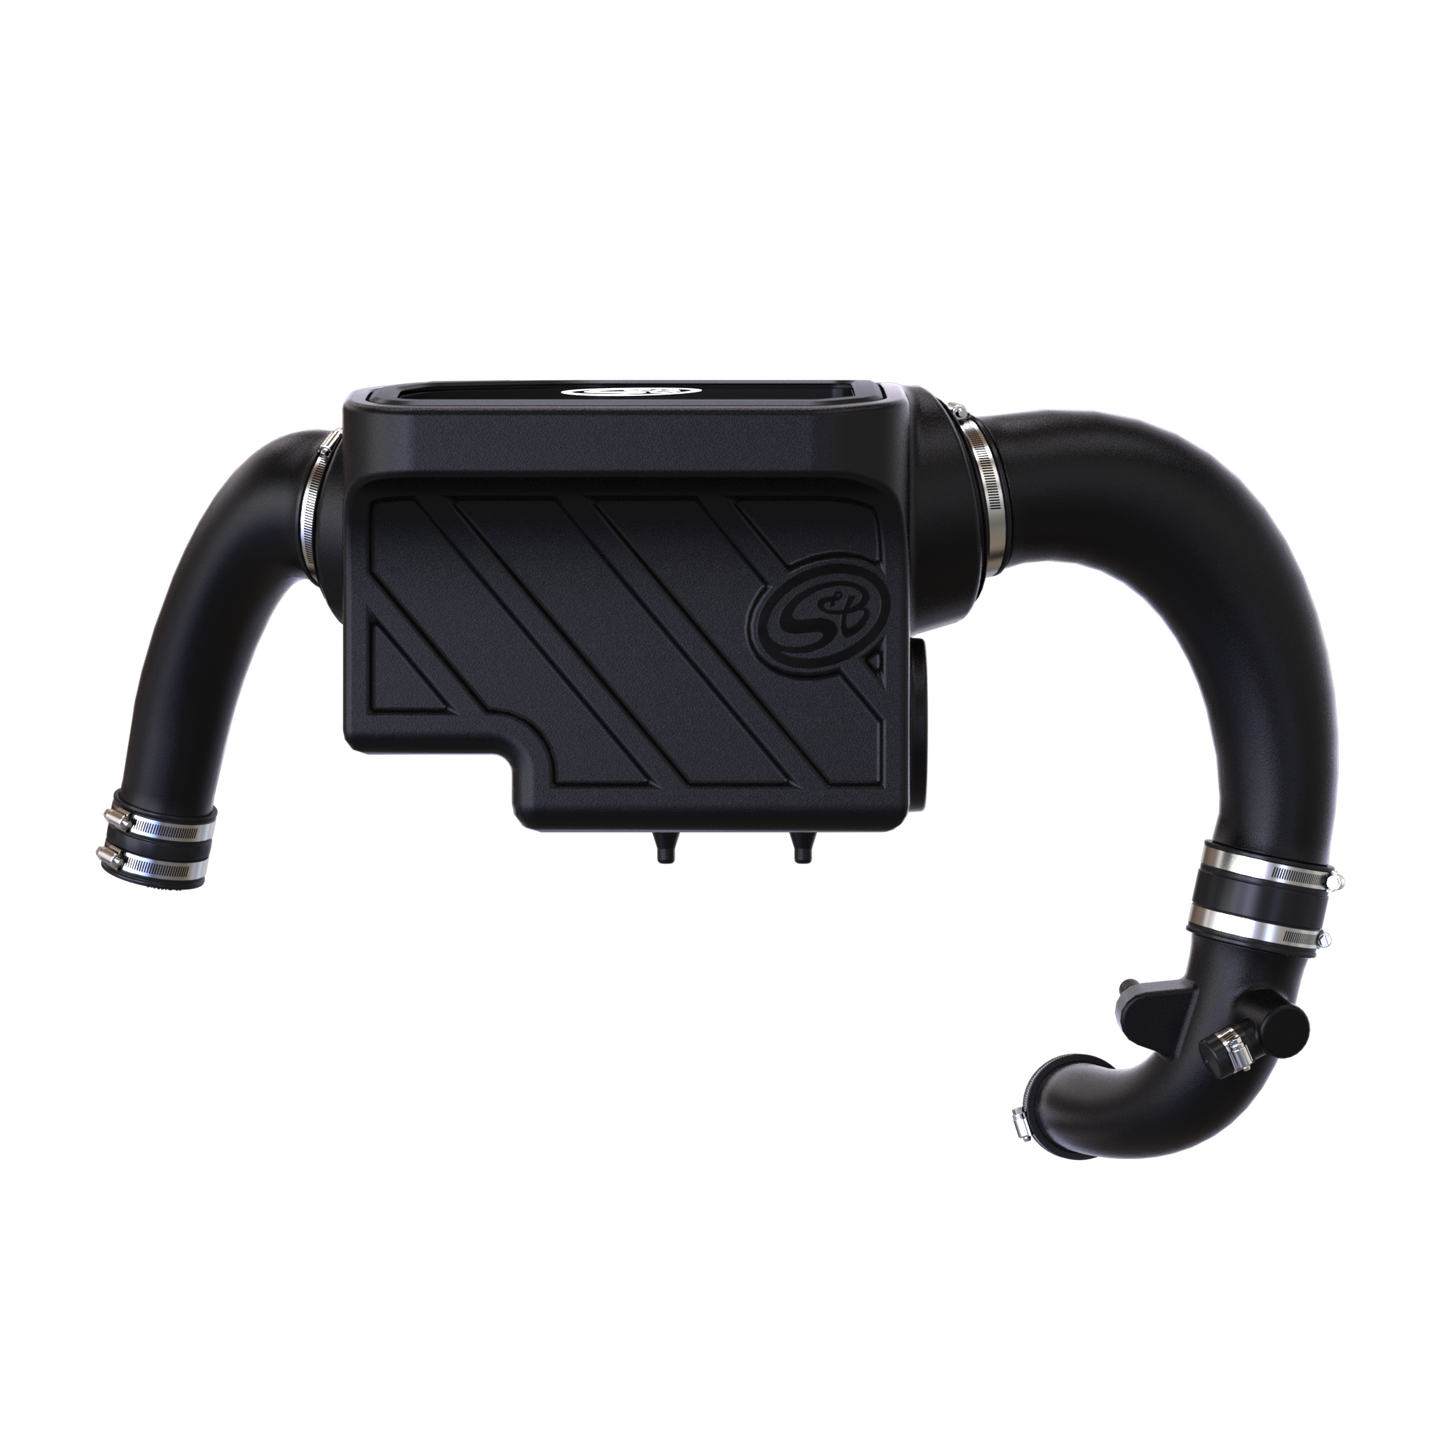 COLD AIR INTAKE FOR THE 2020-2024 FORD EXPLORER ST, EXPLORER, LINCOLN AVIATOR 3.0L